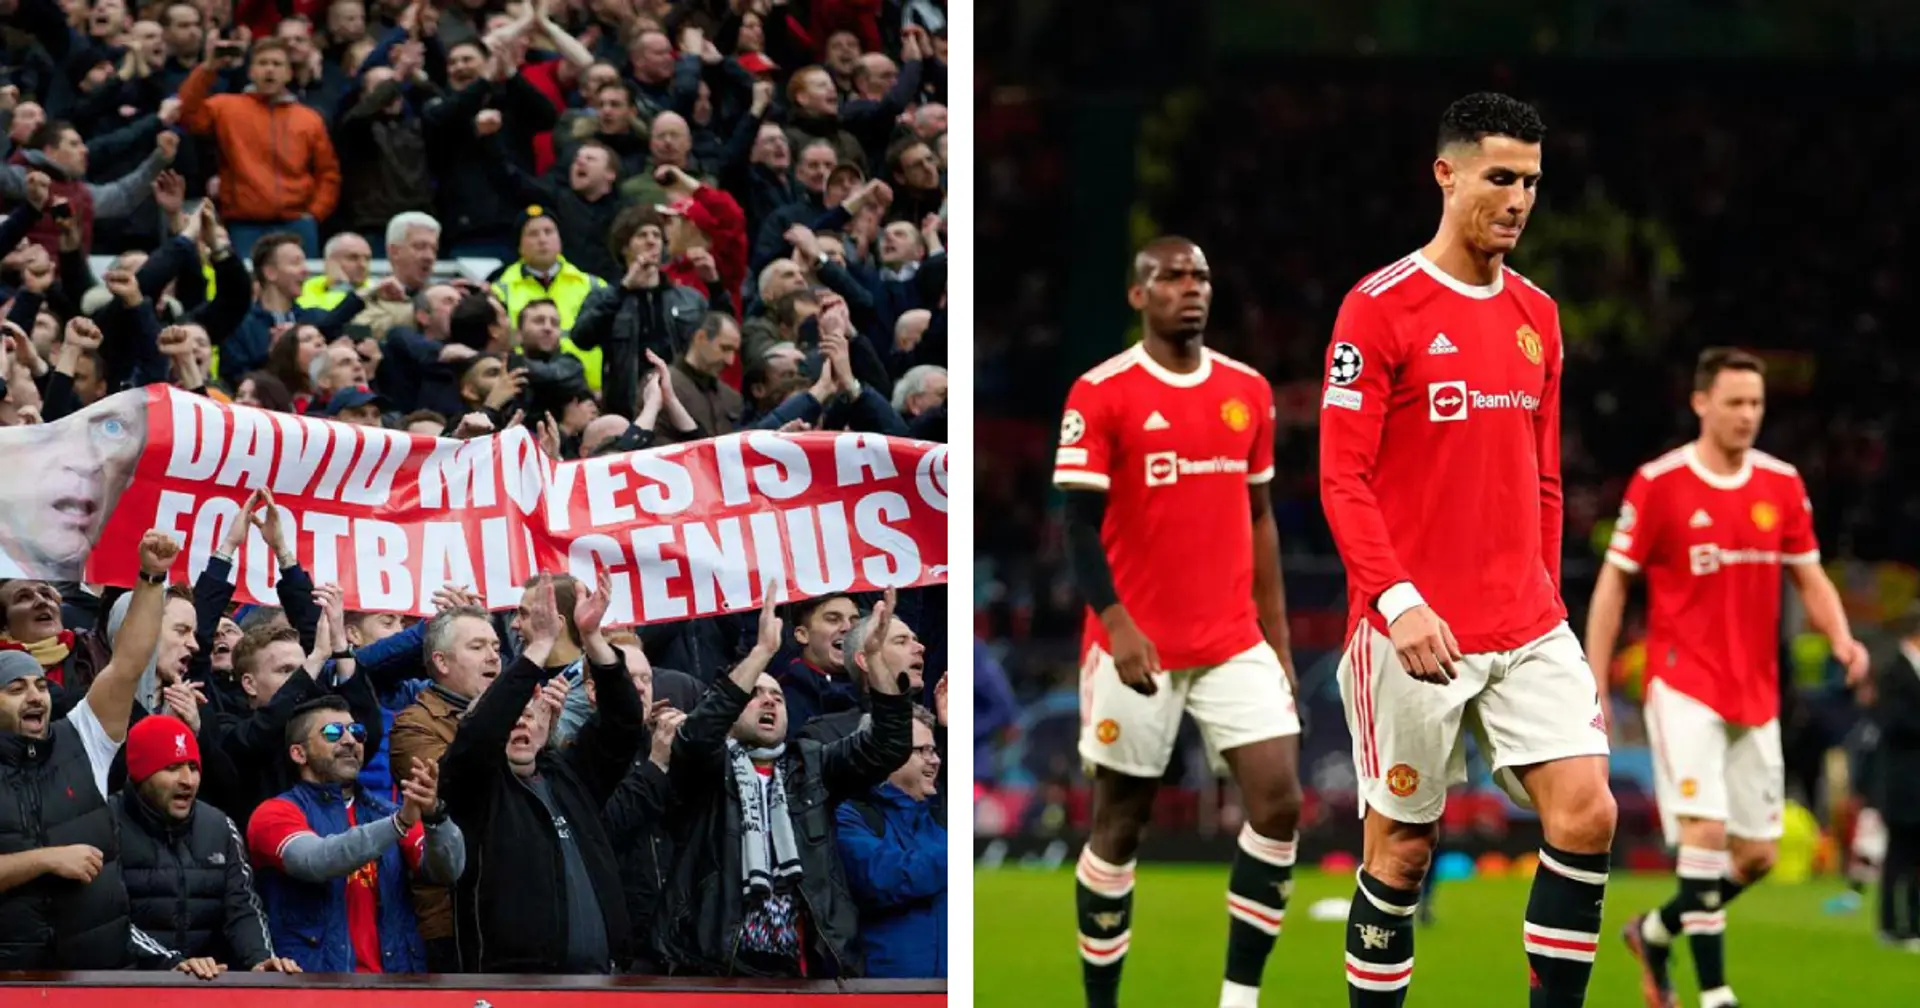 No wins since David Moyes: Man United's abysmal Champions League knockout record at Old Trafford